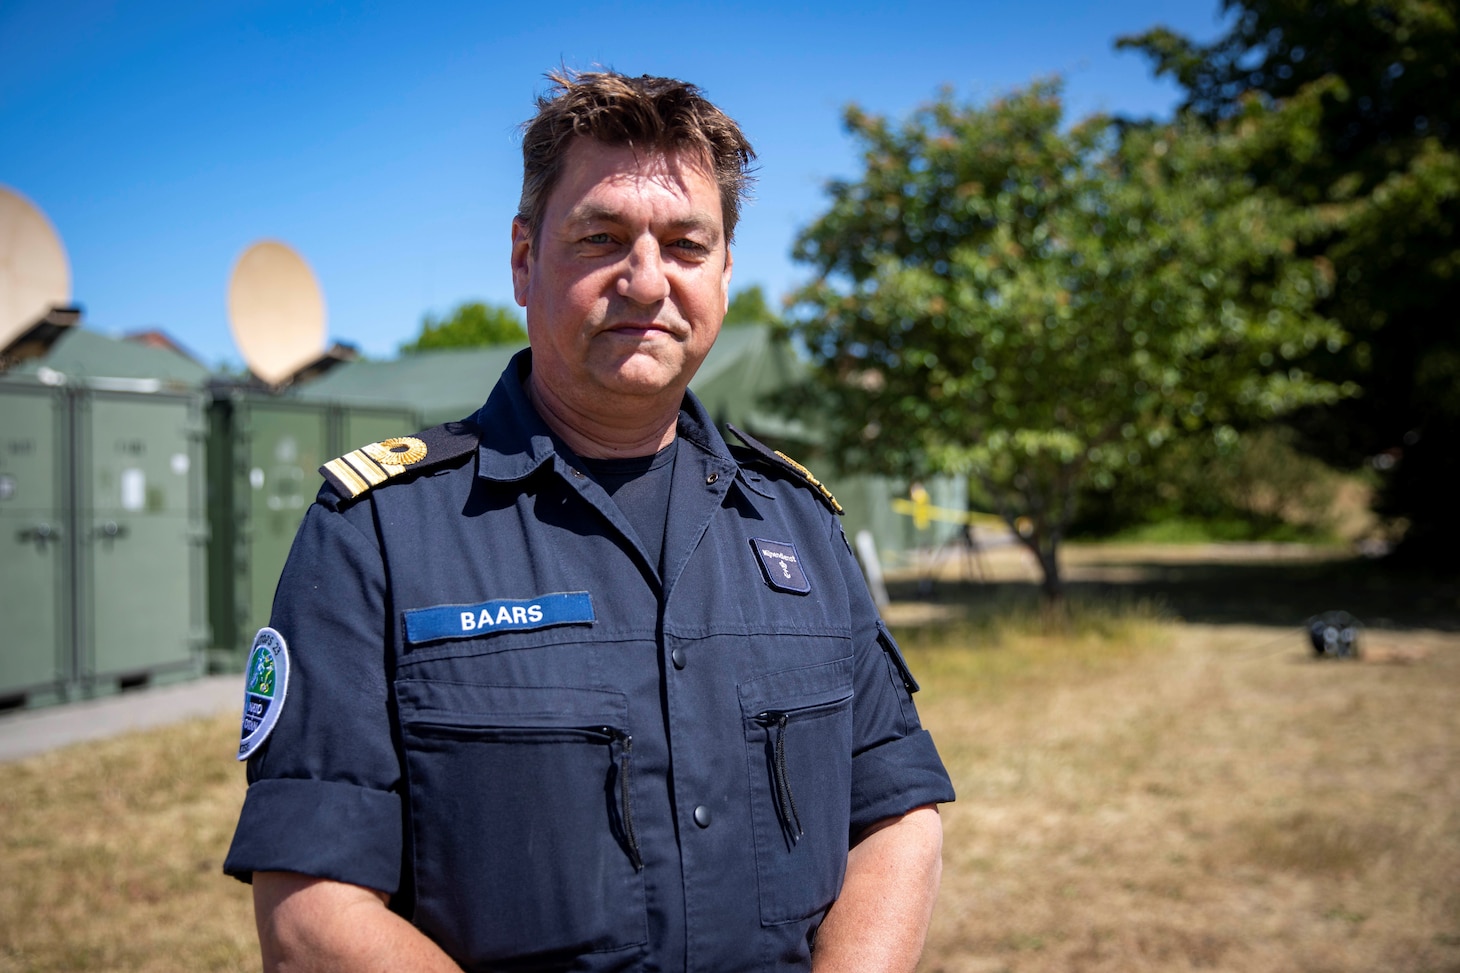 PUTLOS, Germany (June 7, 2023) Royal Netherlands Navy Cmdr. Peter Baars poses for a photograph near the NATO Commander Task Group 162.40 command staff area at the Bundeswehr military training area in Putlos, Germany, during exercise Baltic Operations 2023 (BALTOPS 23). BALTOPS 23 is the premier maritime-focused exercise in the Baltic Region. The exercise, led by U.S. Naval Forces Europe-Africa, and executed by Naval Striking and Support Forces NATO, provides a unique training opportunity to strengthen combined response capabilities critical to preserving freedom of navigation and security in the Baltic Sea. (U.S Navy photo by Mass Communication Specialist 1st Class Matthew Fink)